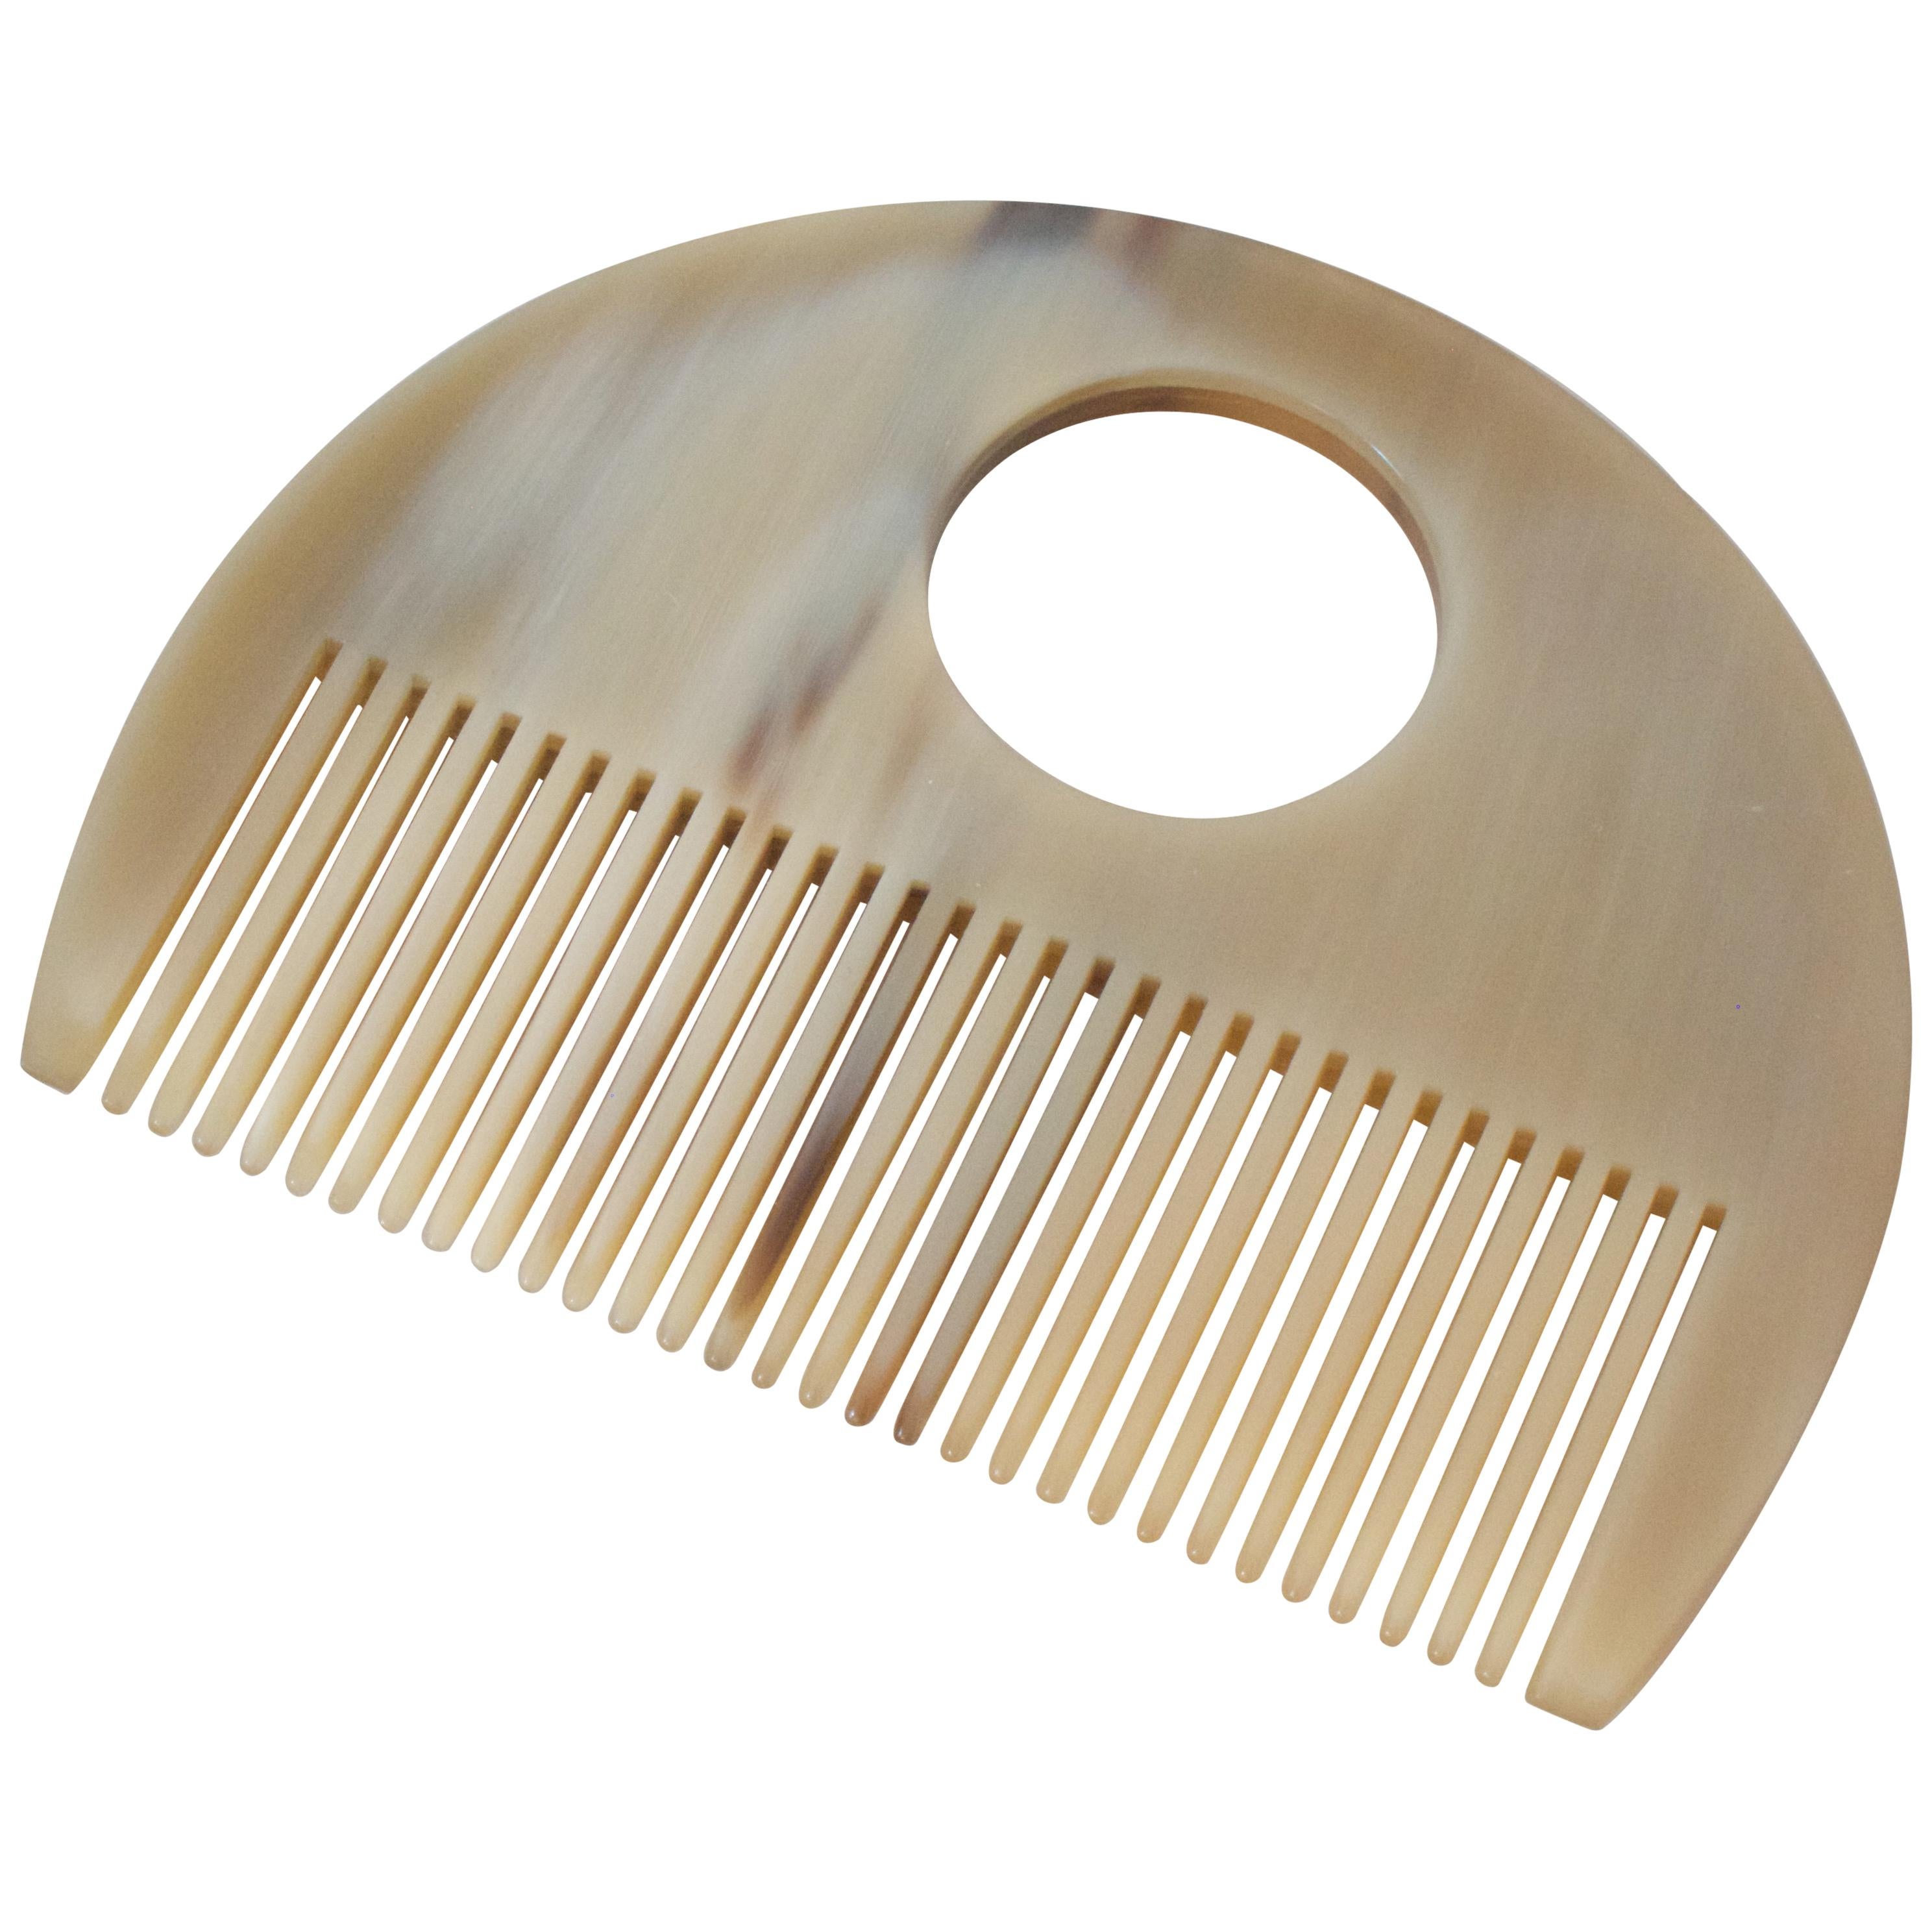 Horn Comb by Carl Auböck im Angebot